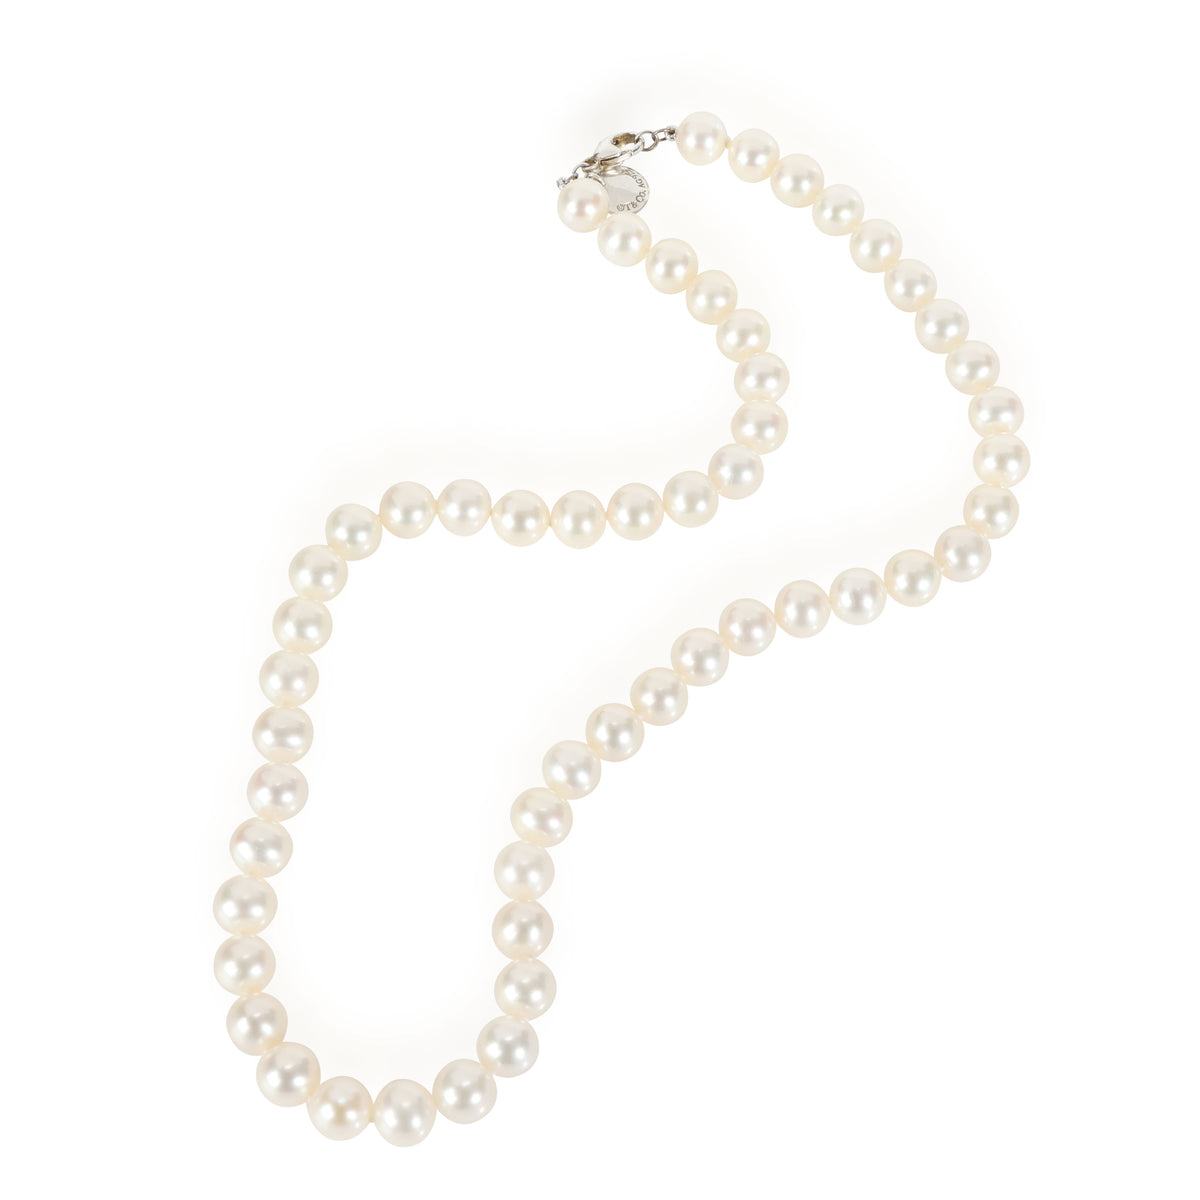 Tiffany & Co. Notes Pearl Necklace in  Sterling Silver